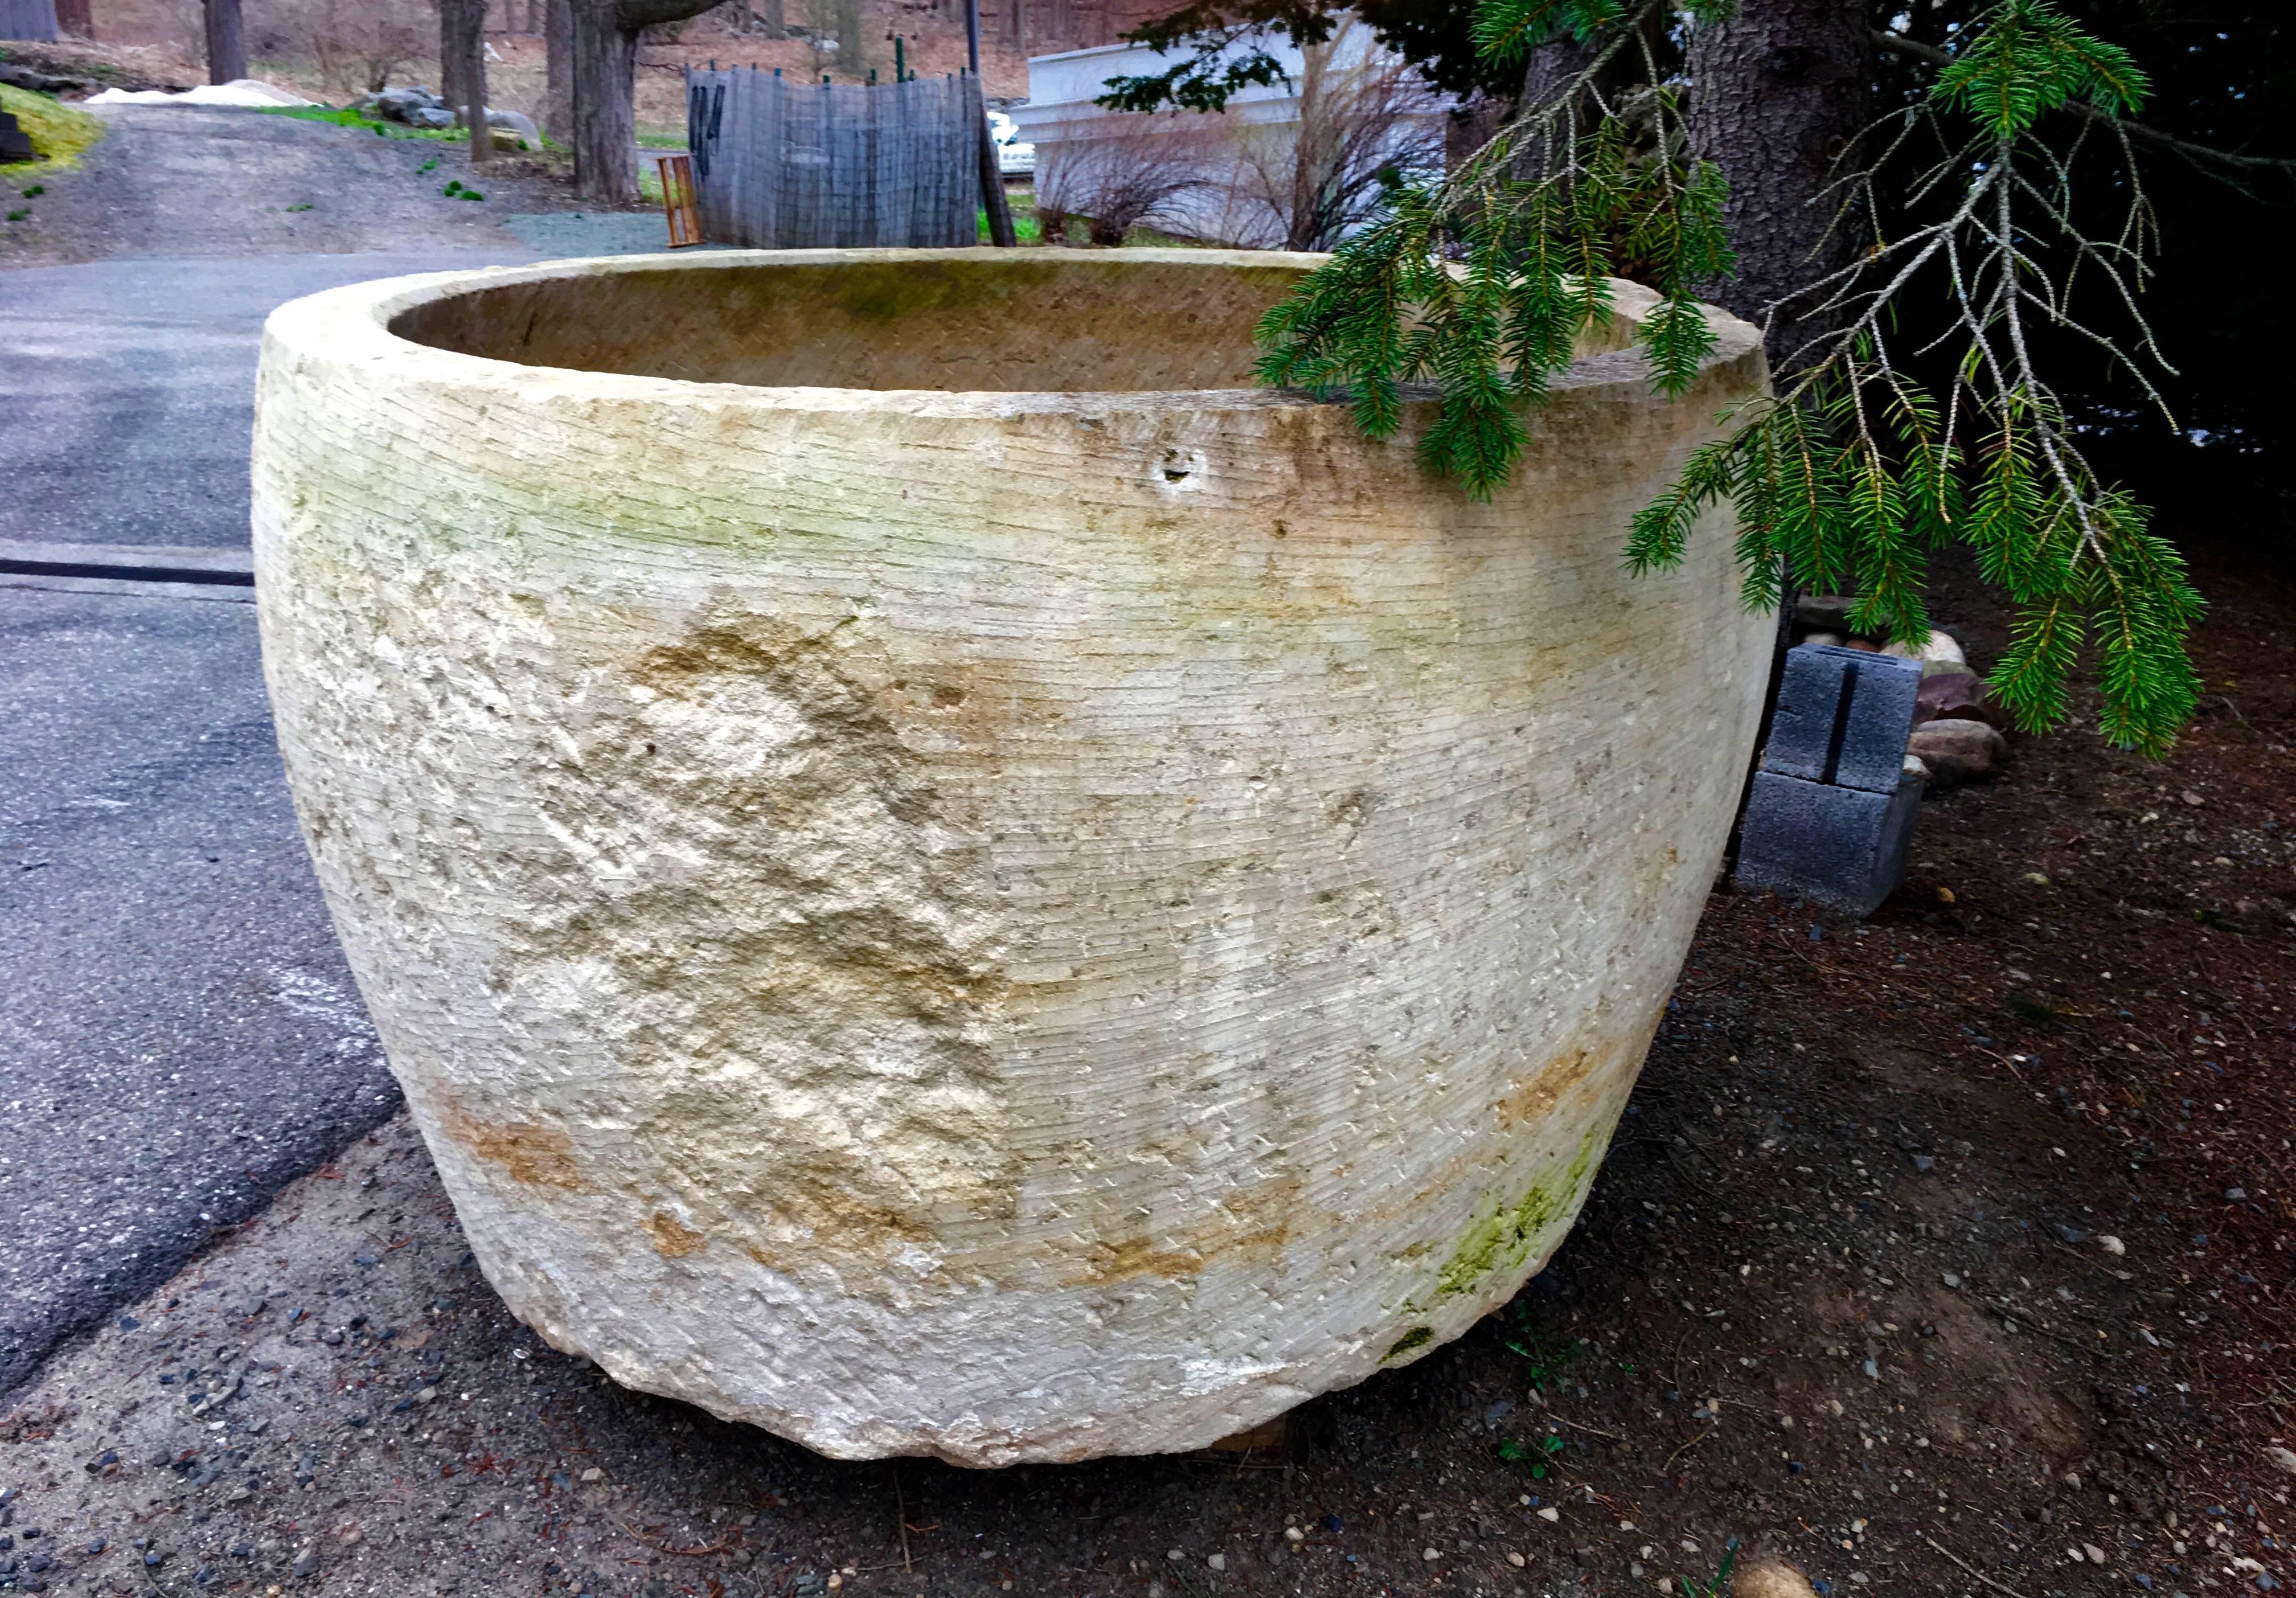 One of the most exceptional finds of our French buying trips, this enormous round trough is hand-carved from a soft limestone known as Pierre de Deux Sevres. Its warm honey color and light weathering are most appealing and it would be stunning as a